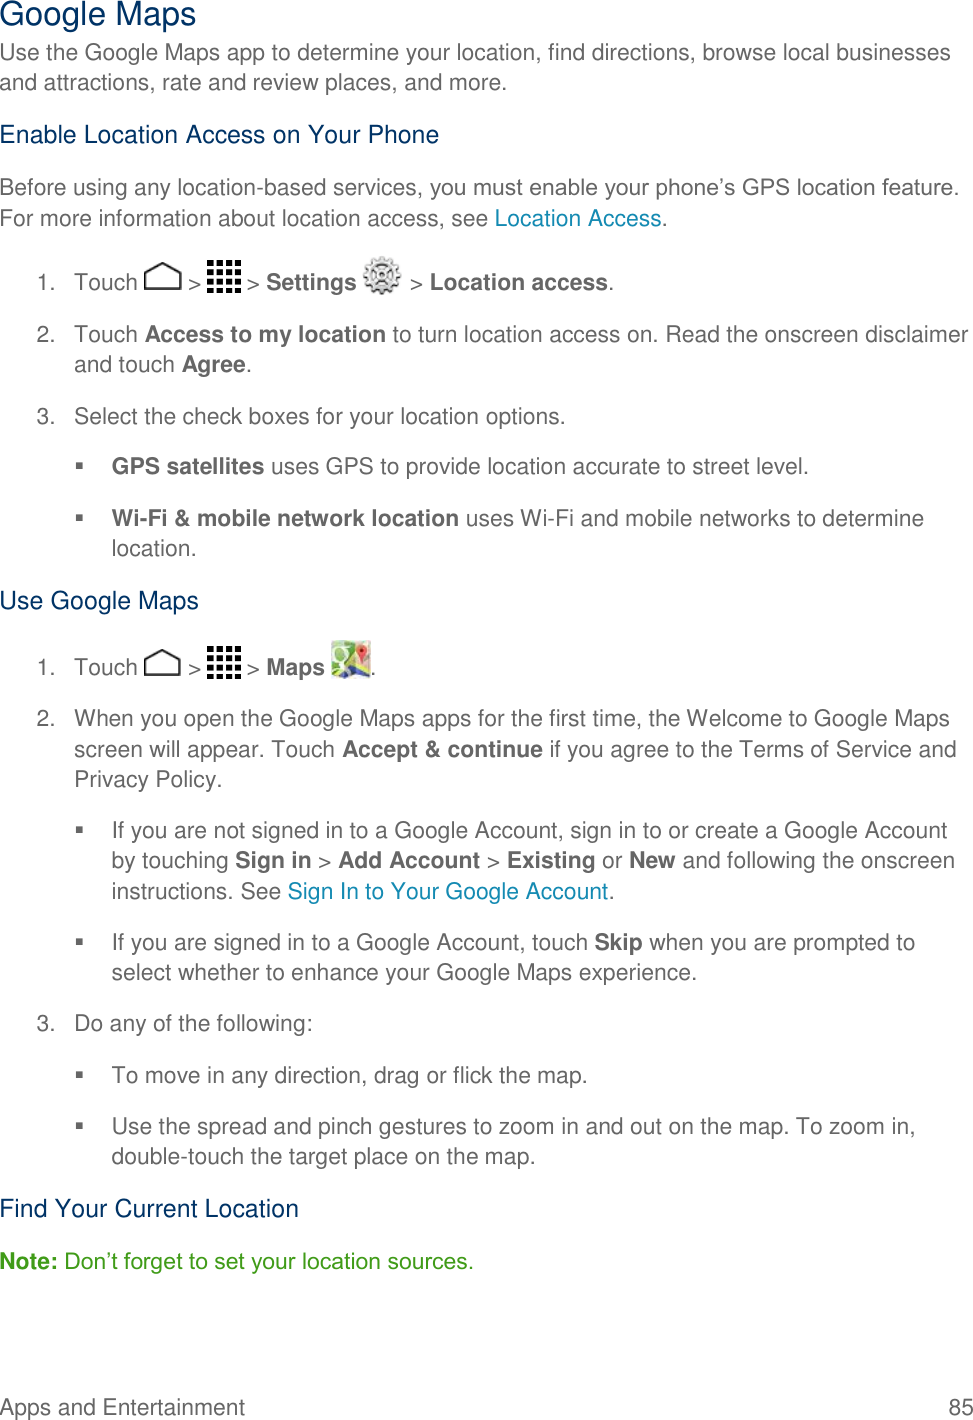 Apps and Entertainment  85   Google Maps Use the Google Maps app to determine your location, find directions, browse local businesses and attractions, rate and review places, and more.  Enable Location Access on Your Phone Before using any location-based services, you must enable your phone’s GPS location feature. For more information about location access, see Location Access.  1.  Touch   &gt;   &gt; Settings   &gt; Location access. 2.  Touch Access to my location to turn location access on. Read the onscreen disclaimer and touch Agree. 3.  Select the check boxes for your location options.  GPS satellites uses GPS to provide location accurate to street level.  Wi-Fi &amp; mobile network location uses Wi-Fi and mobile networks to determine location. Use Google Maps 1.  Touch   &gt;   &gt; Maps  . 2.  When you open the Google Maps apps for the first time, the Welcome to Google Maps screen will appear. Touch Accept &amp; continue if you agree to the Terms of Service and Privacy Policy.   If you are not signed in to a Google Account, sign in to or create a Google Account by touching Sign in &gt; Add Account &gt; Existing or New and following the onscreen instructions. See Sign In to Your Google Account.   If you are signed in to a Google Account, touch Skip when you are prompted to select whether to enhance your Google Maps experience. 3.  Do any of the following:    To move in any direction, drag or flick the map.   Use the spread and pinch gestures to zoom in and out on the map. To zoom in, double-touch the target place on the map. Find Your Current Location Note: Don’t forget to set your location sources. 